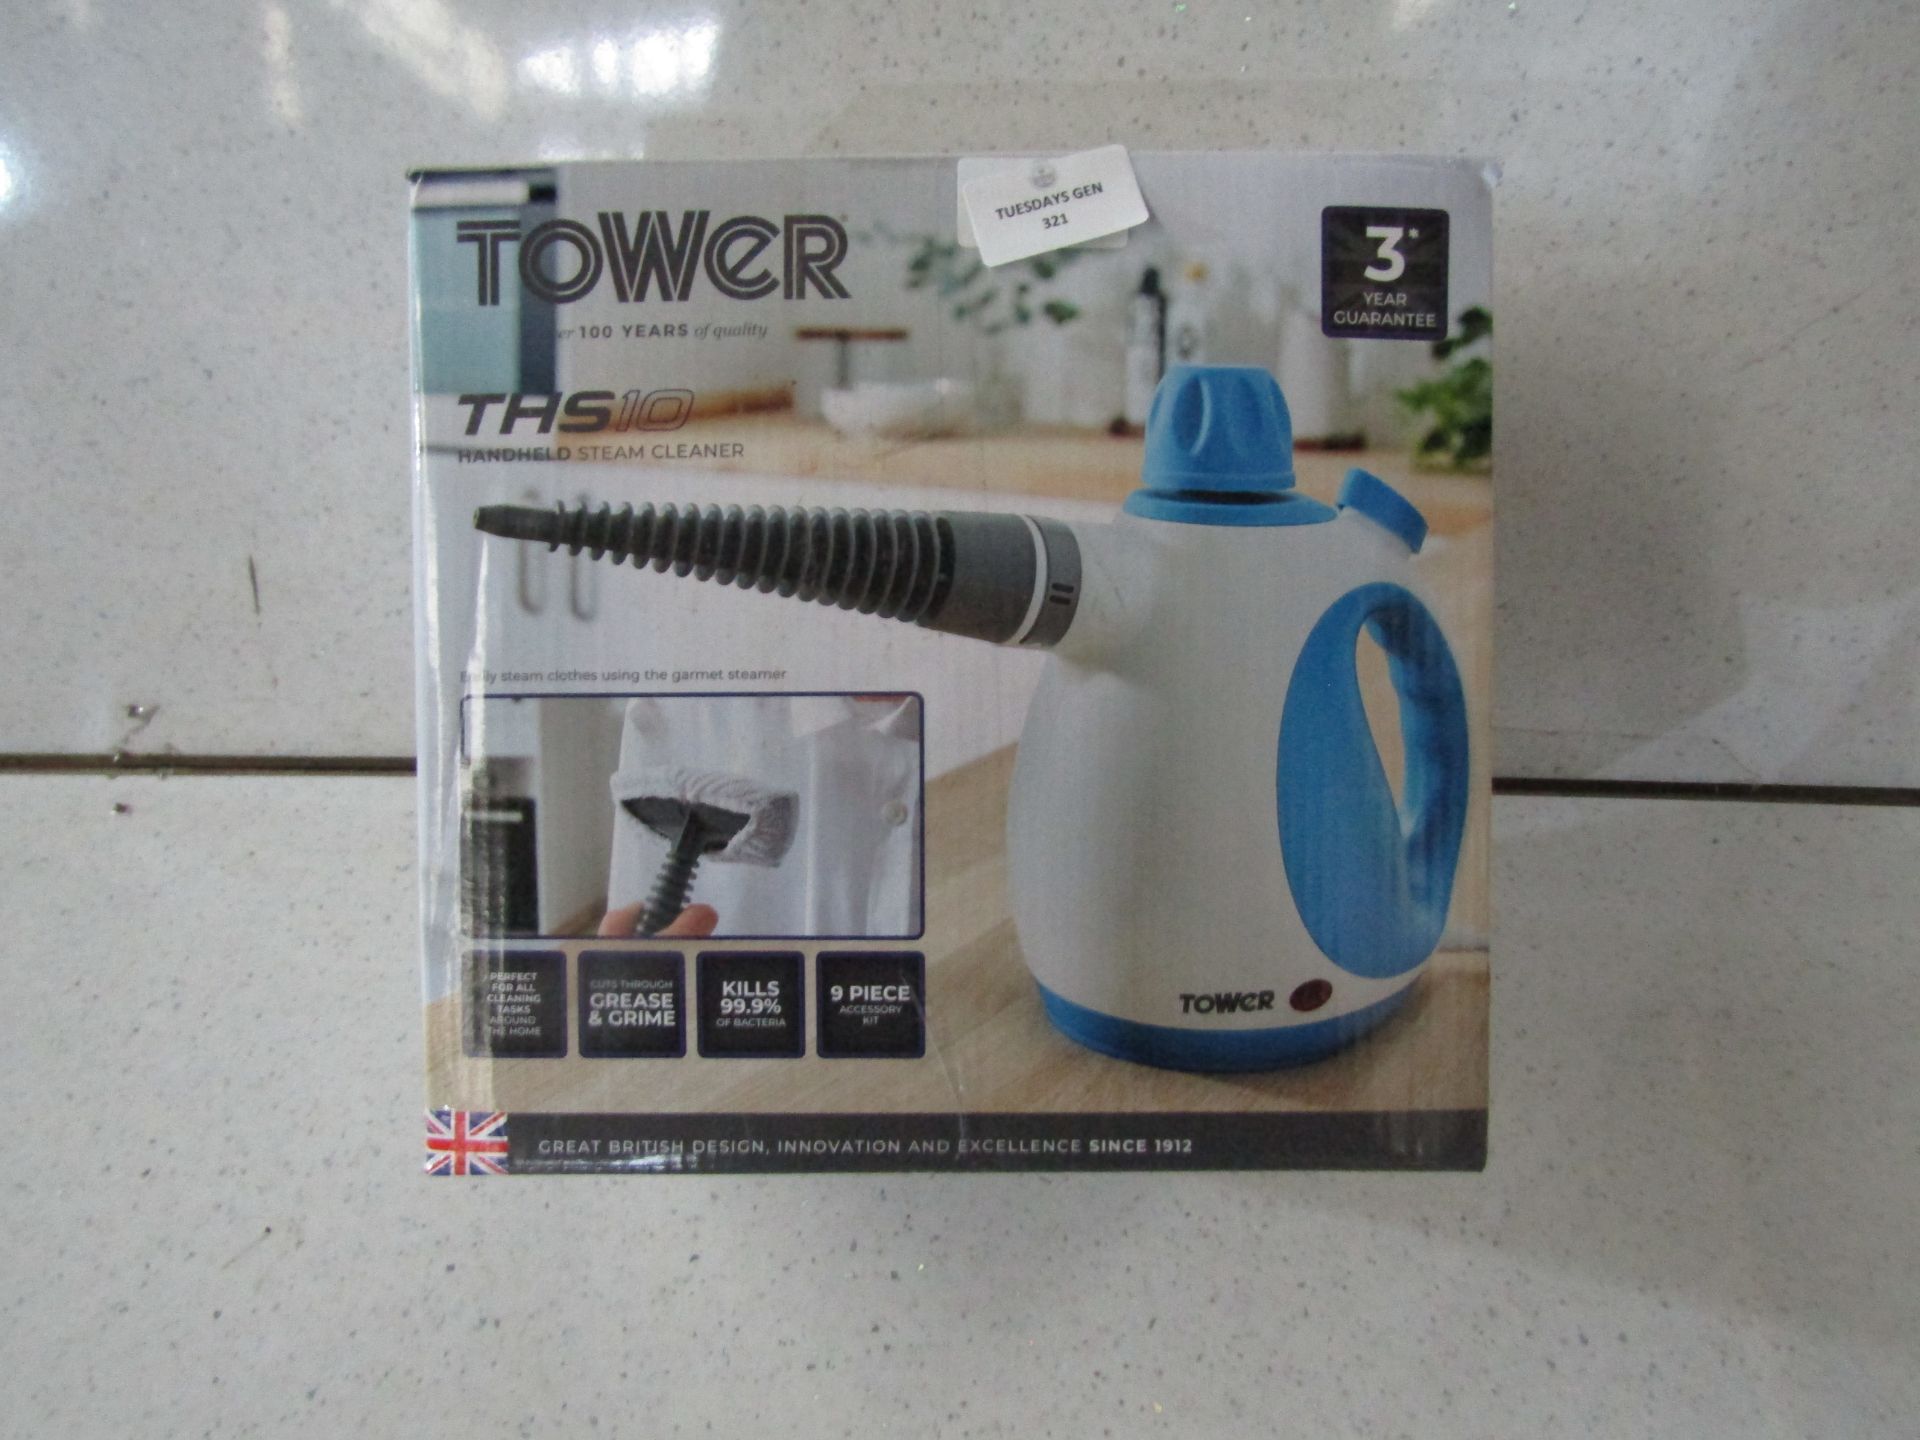 Tower - THS10 Handheld Steam Cleaner - Untested & Boxed. - Image 2 of 2